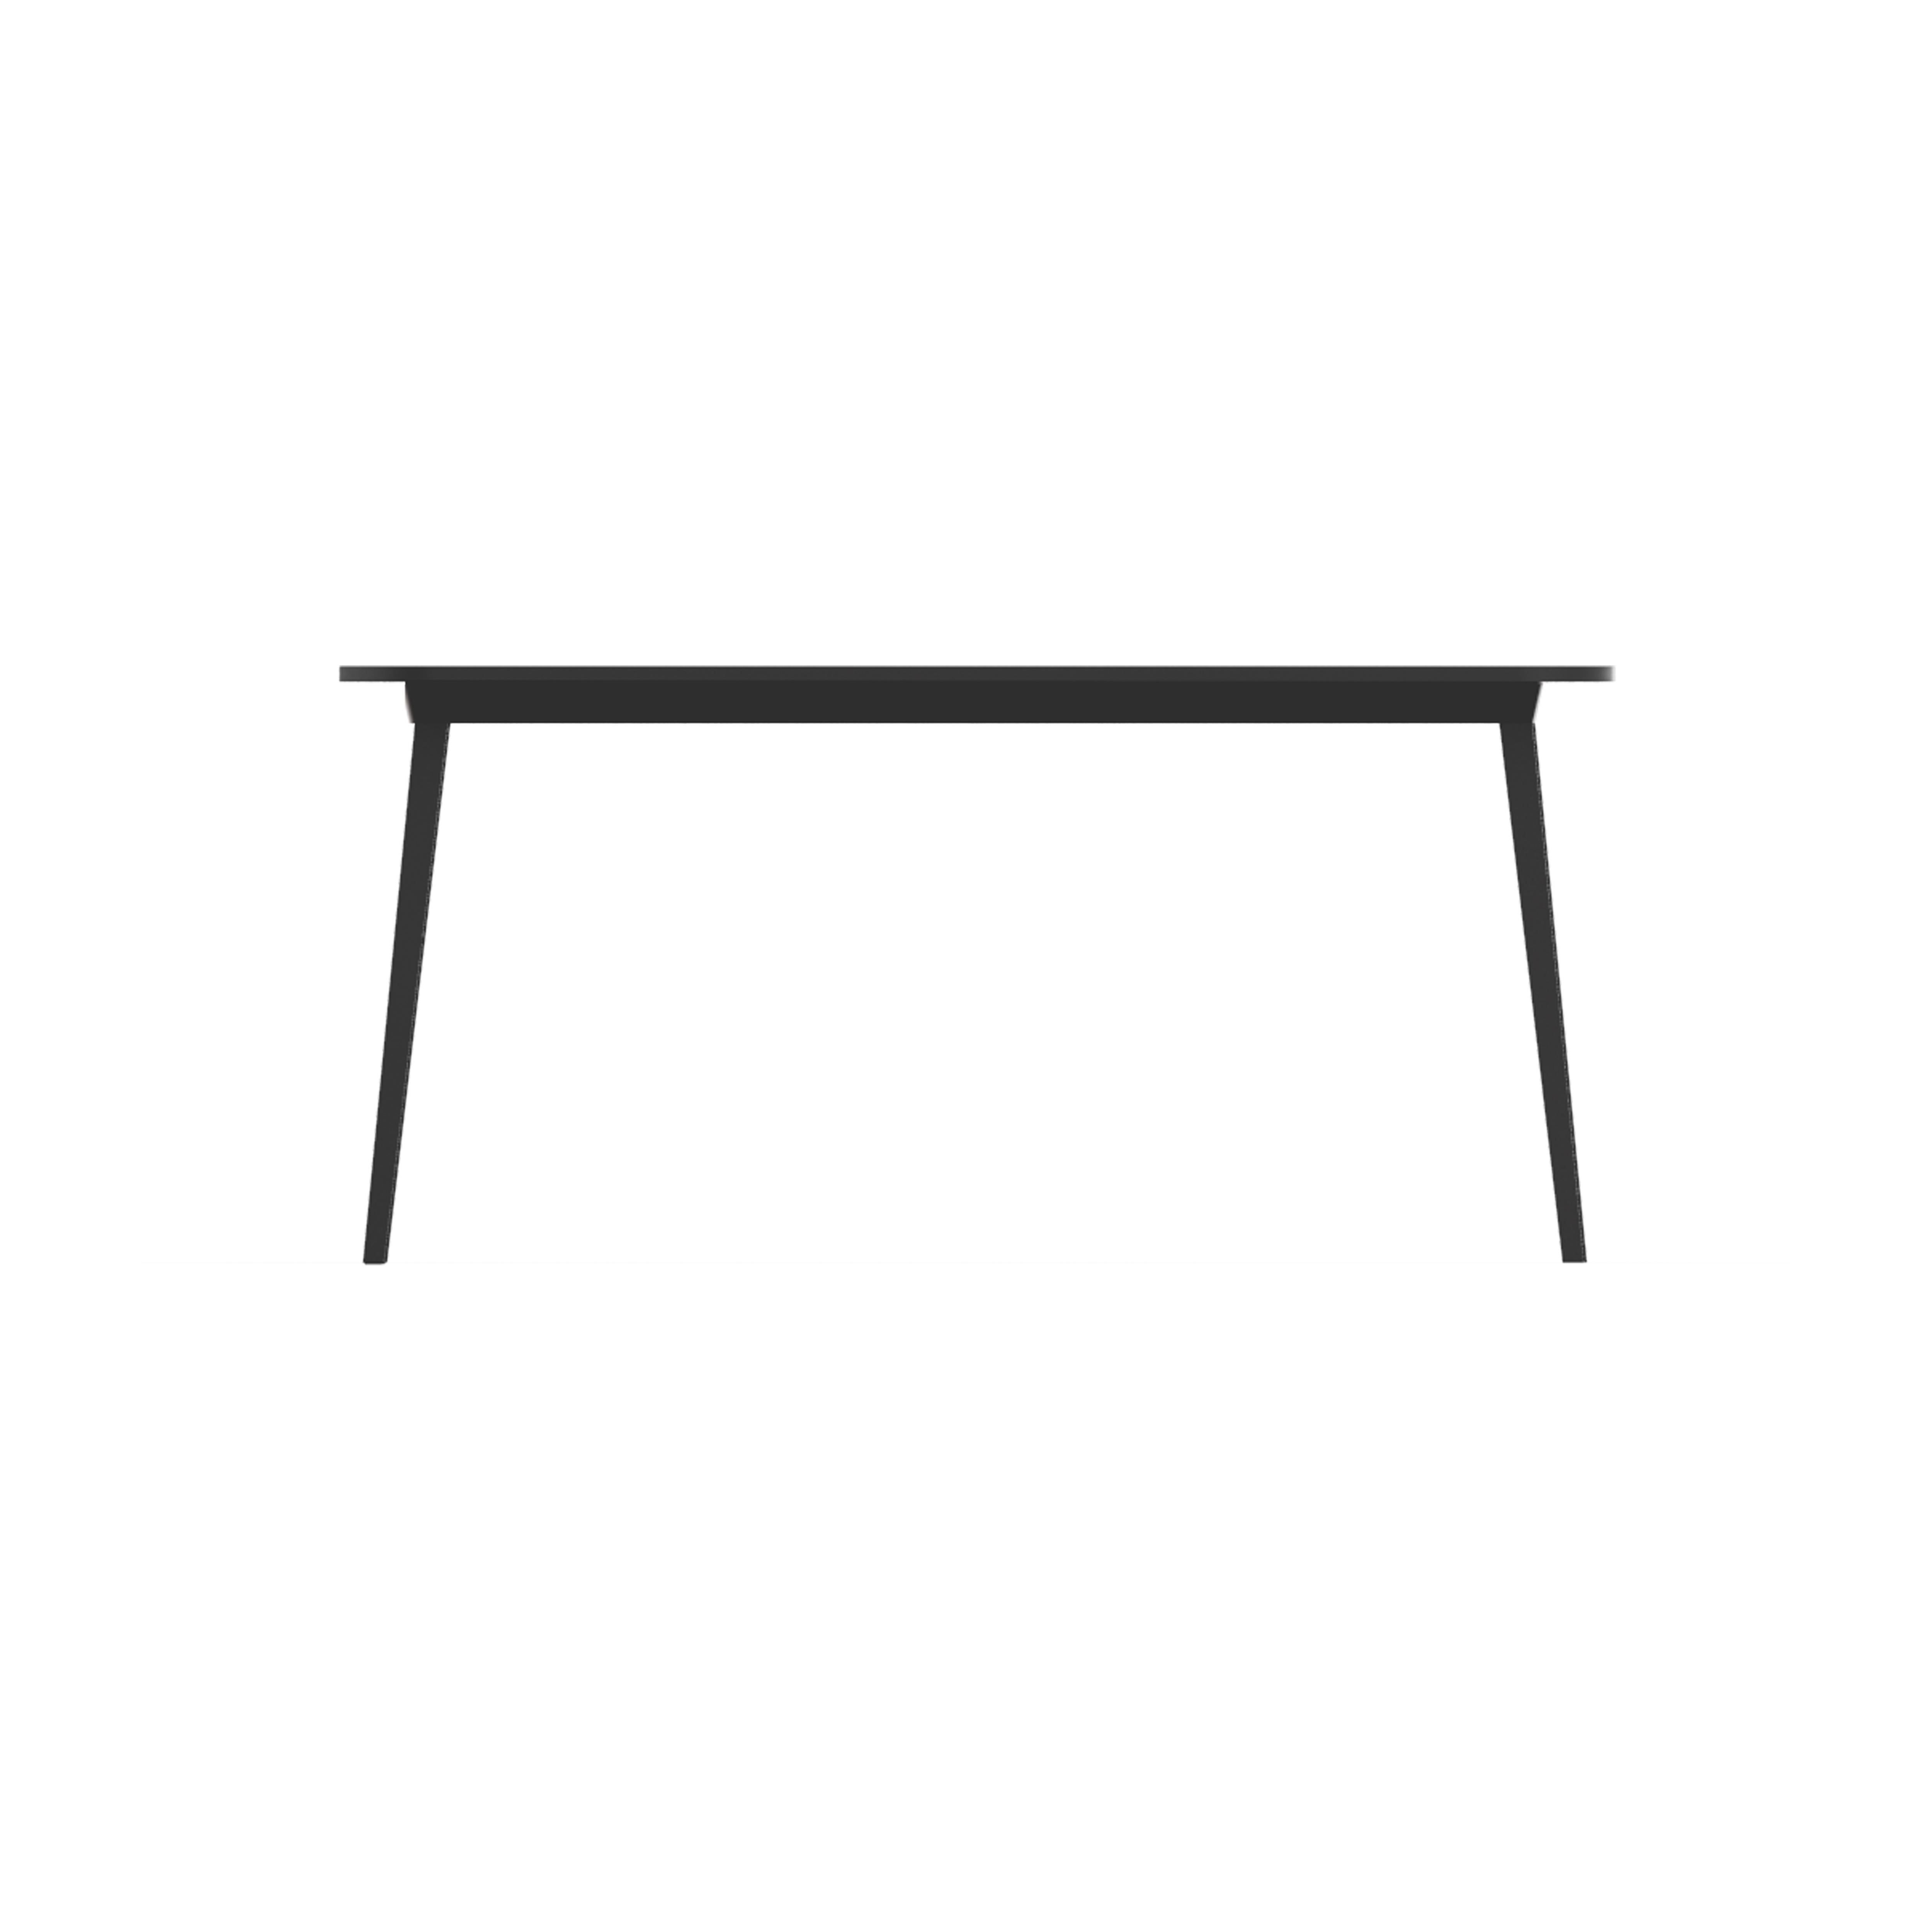 X is a family of tables of different sizes, composed of an extensible aluminum structure with wooden top or single-material in total black plastic. The rectangular table with six-seat is designed for rooms and domestic interiors.

Specifications: